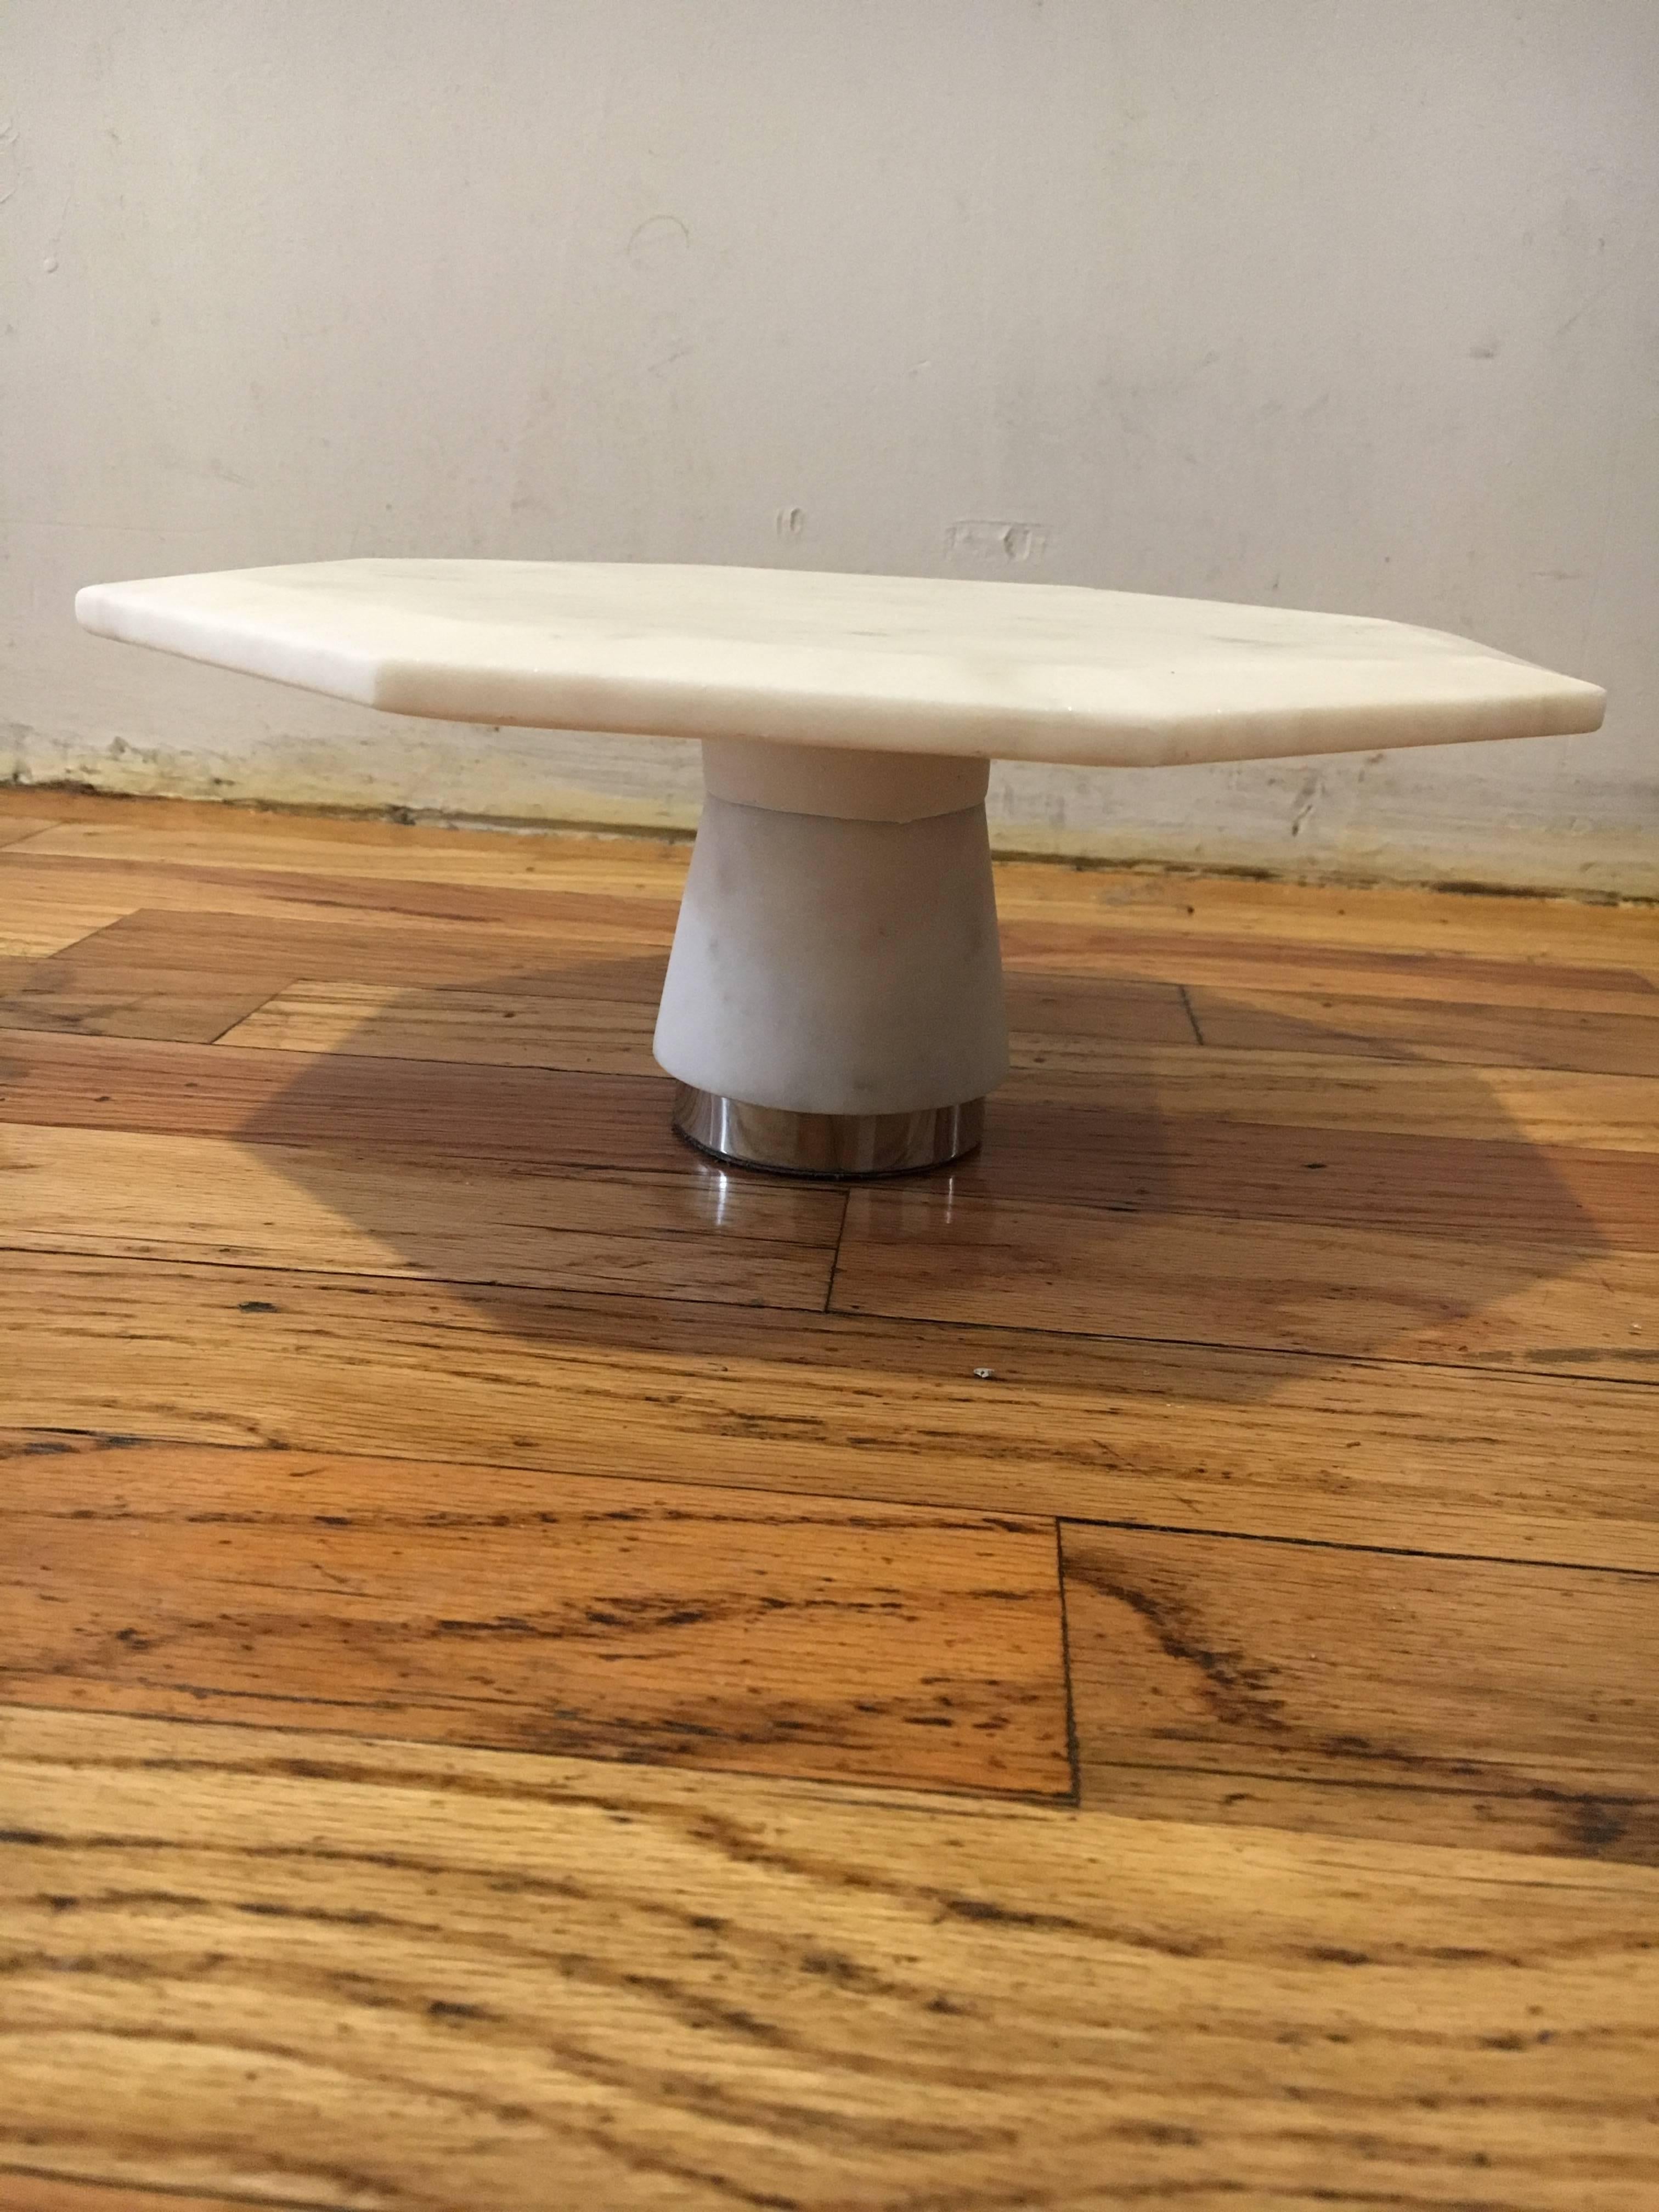 Octagonal marble serving cake stand.